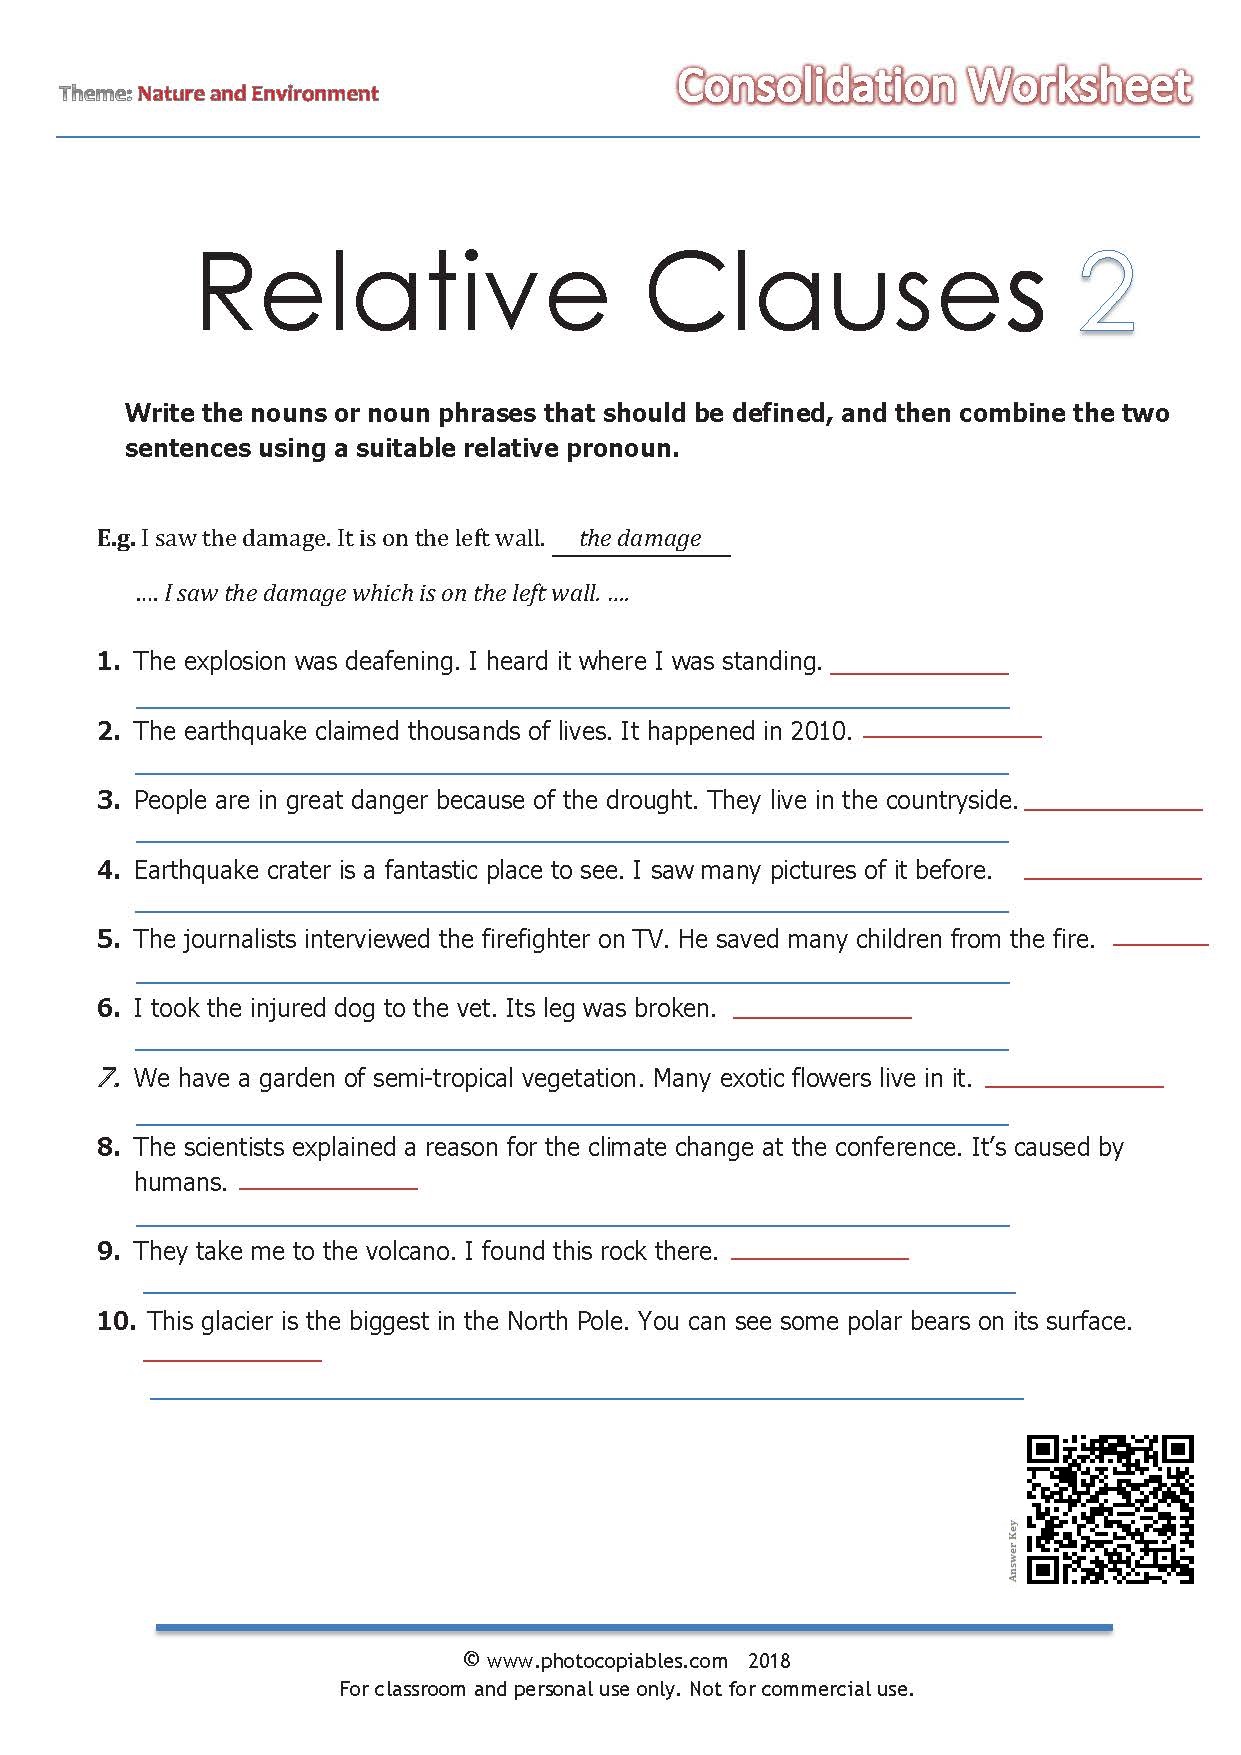 relative-clauses-consolidation-worksheet-2-photocopiables